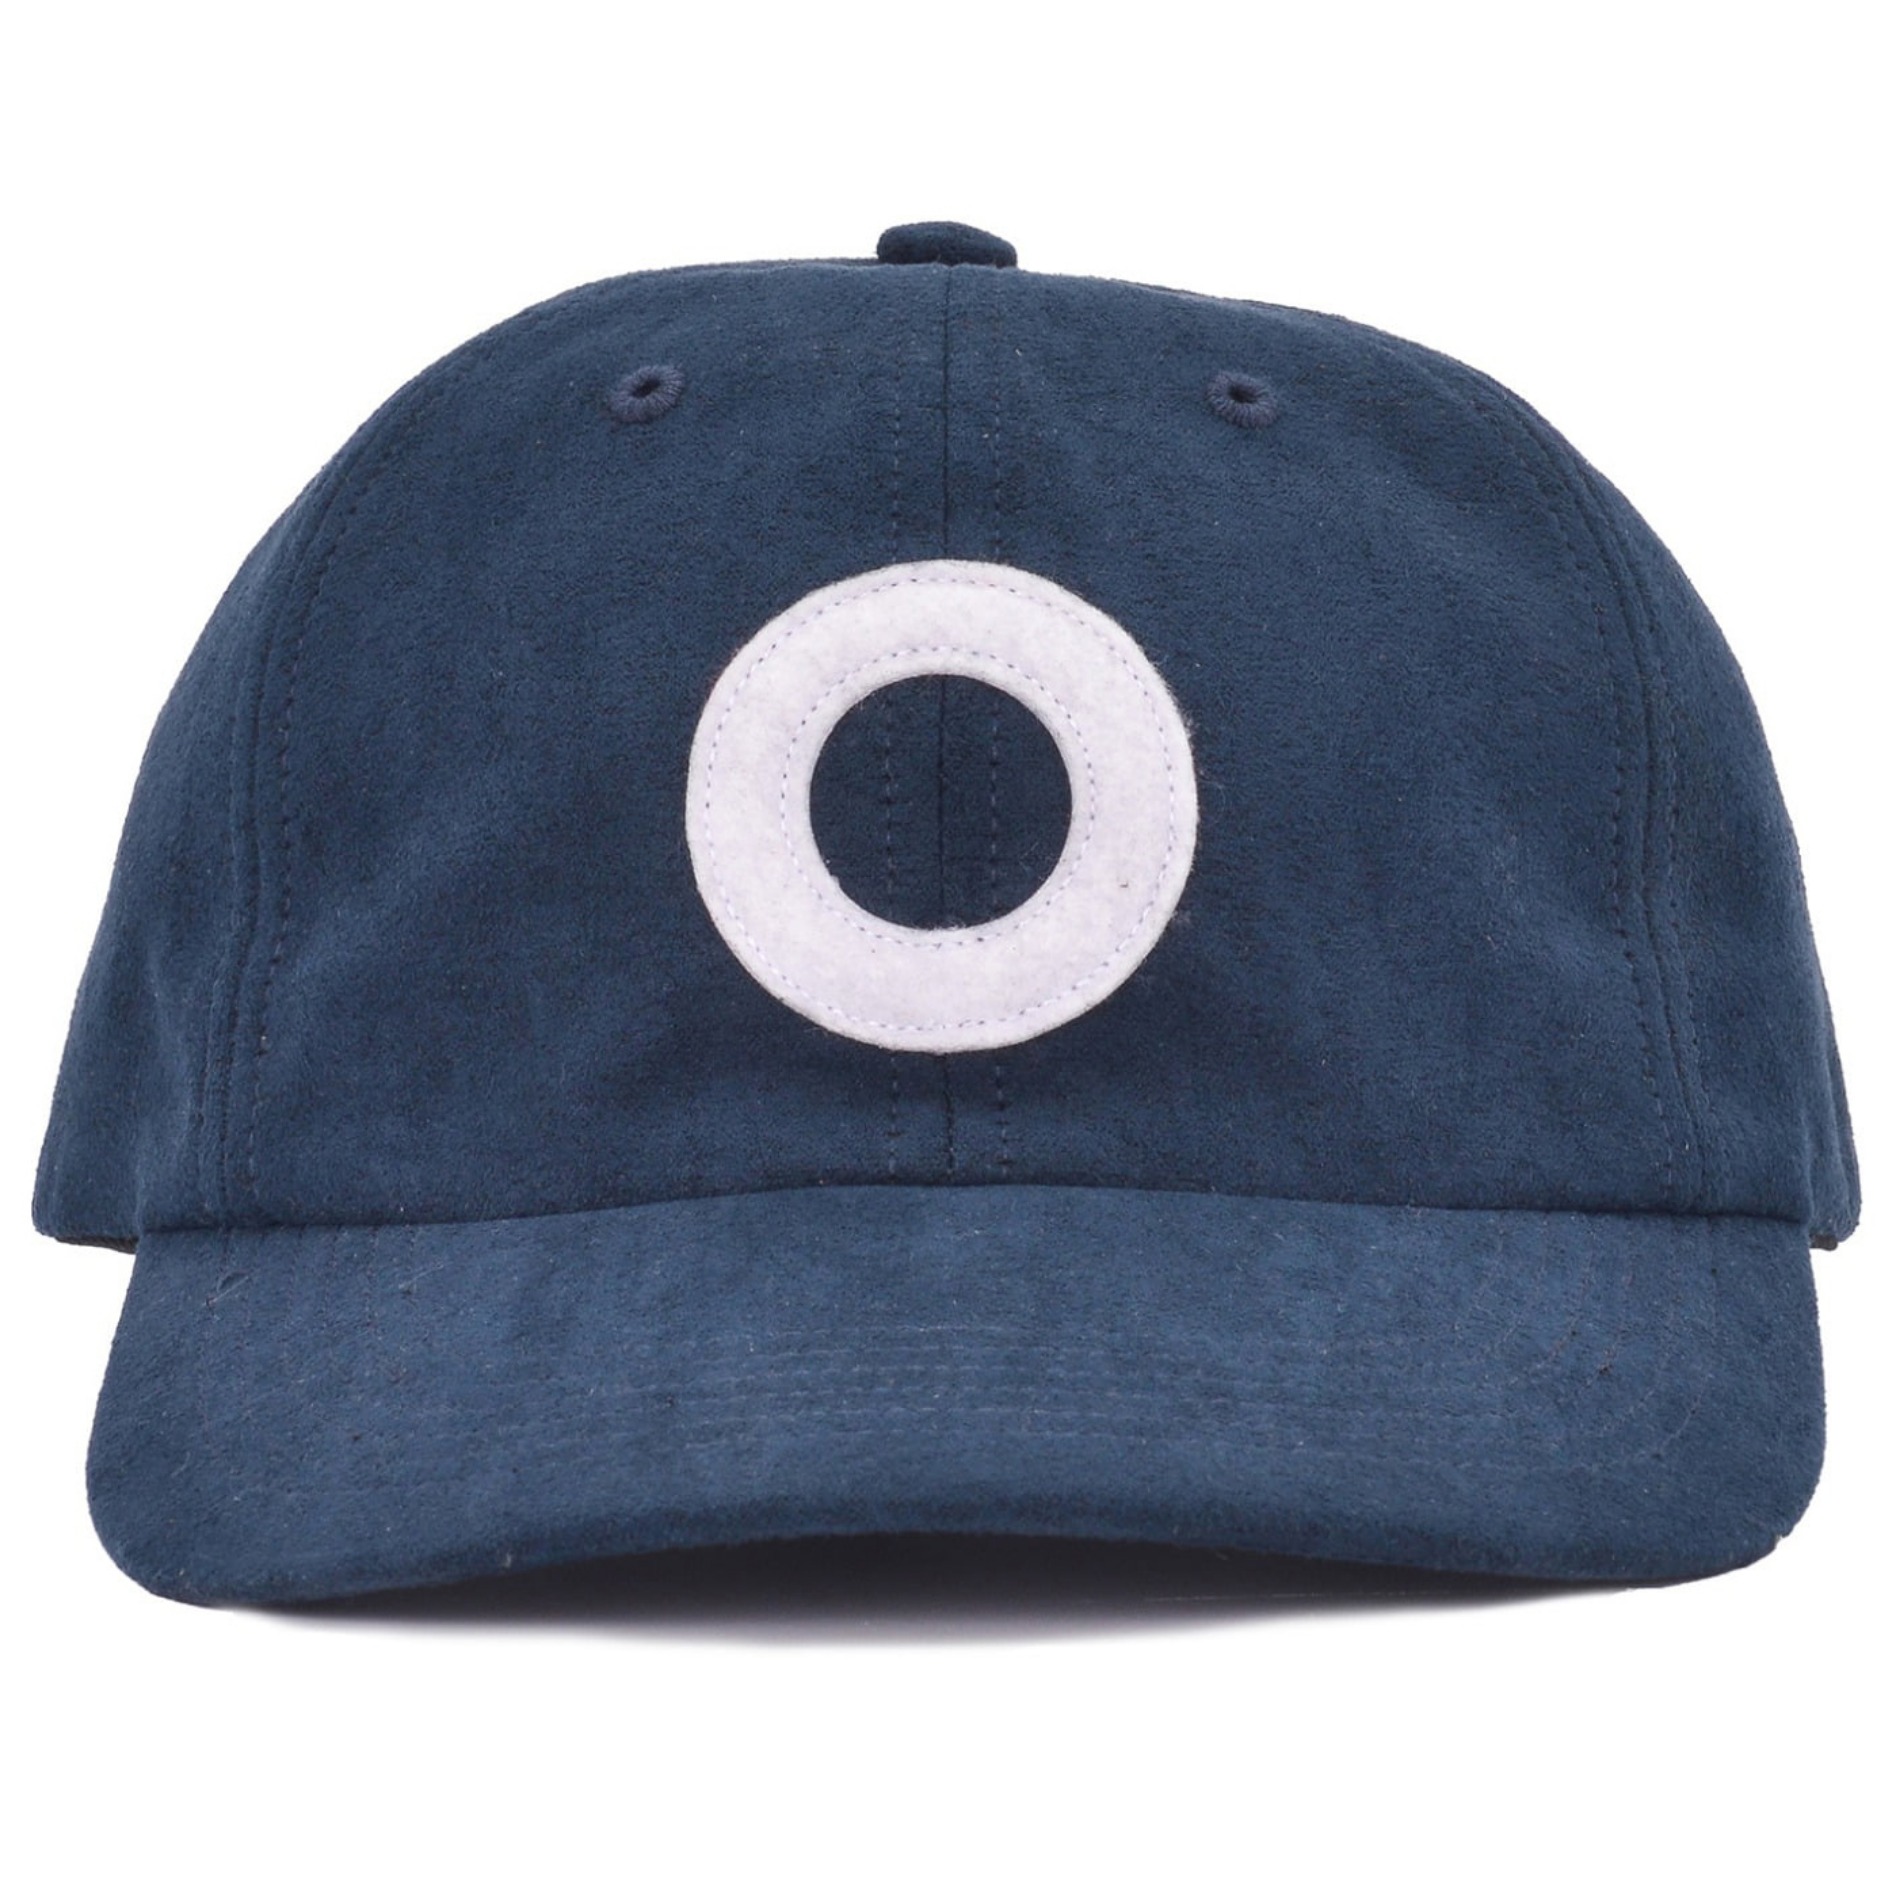 SS23 POP TRADING COMPANY SUEDE O 6 PANEL CAP NAVY